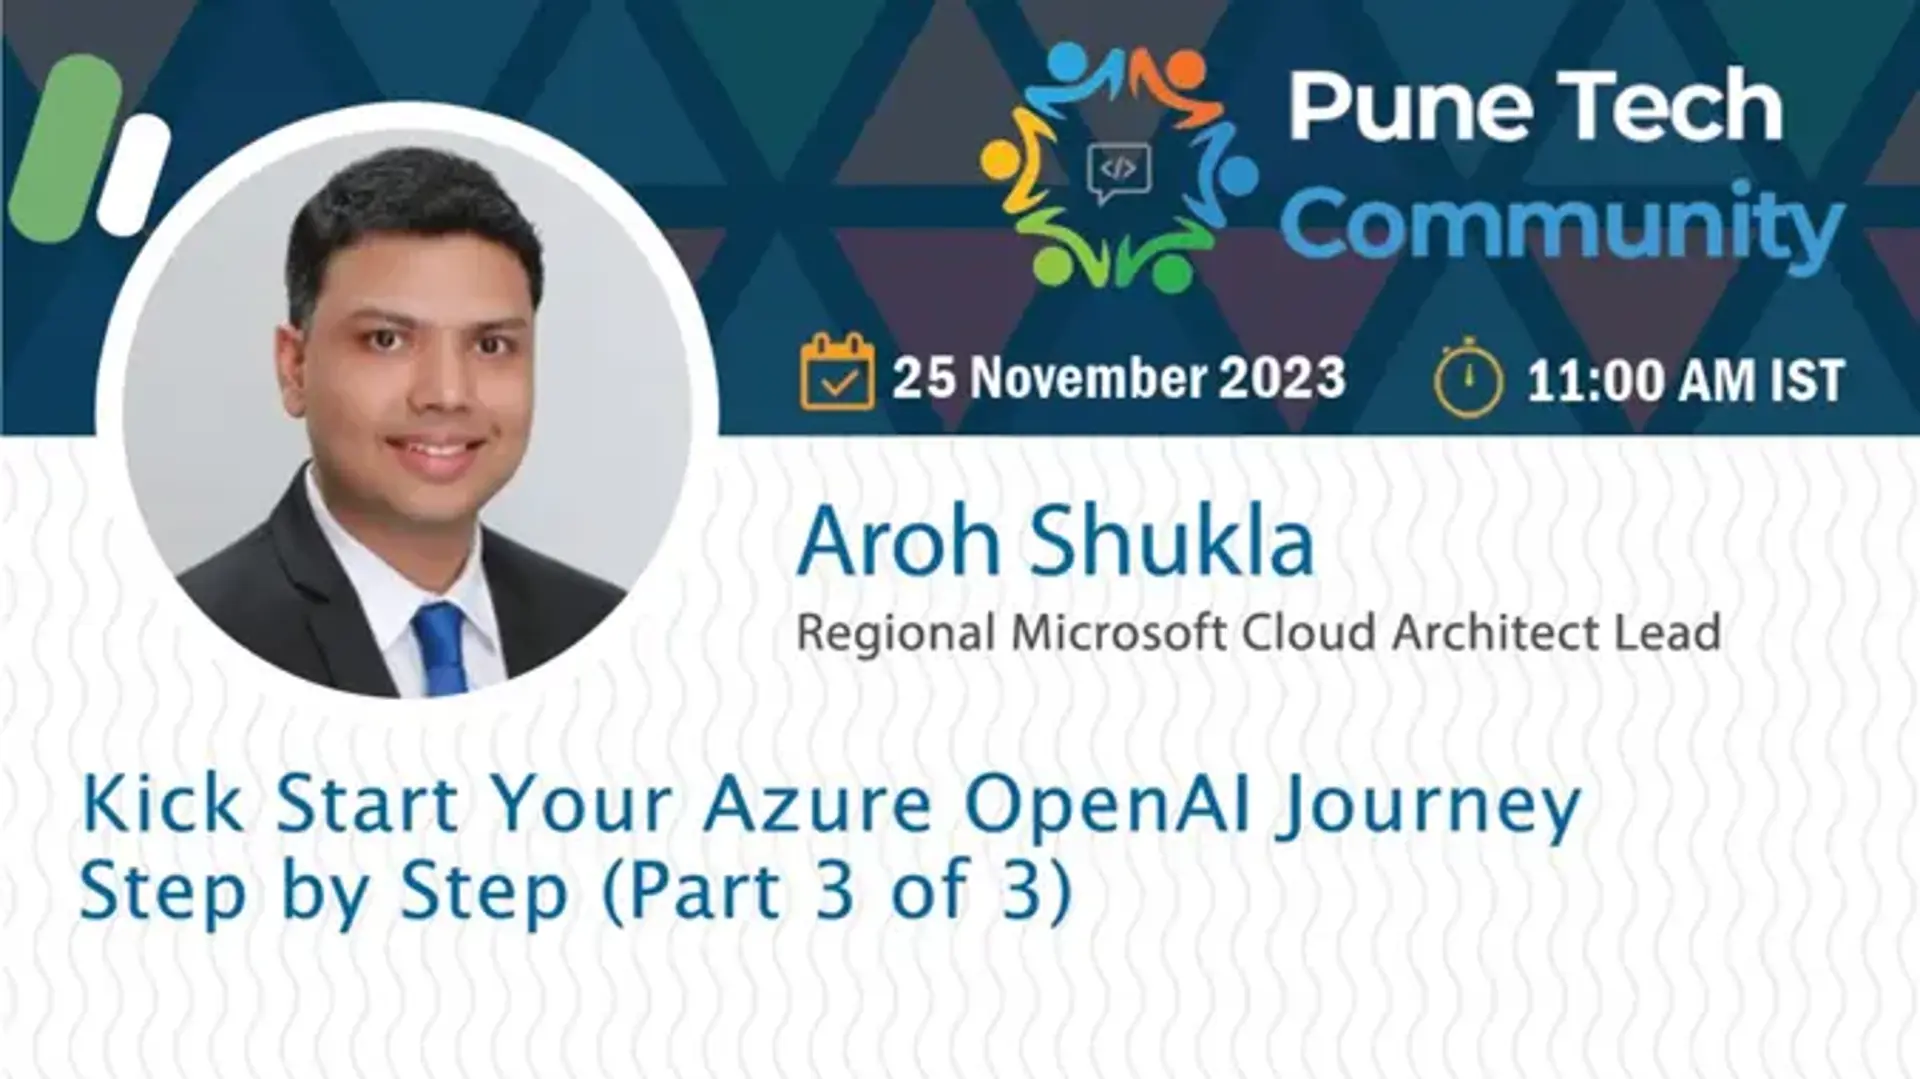 Kick Start Your Azure OpenAI Journey Step by Step (Part 3 of 3)